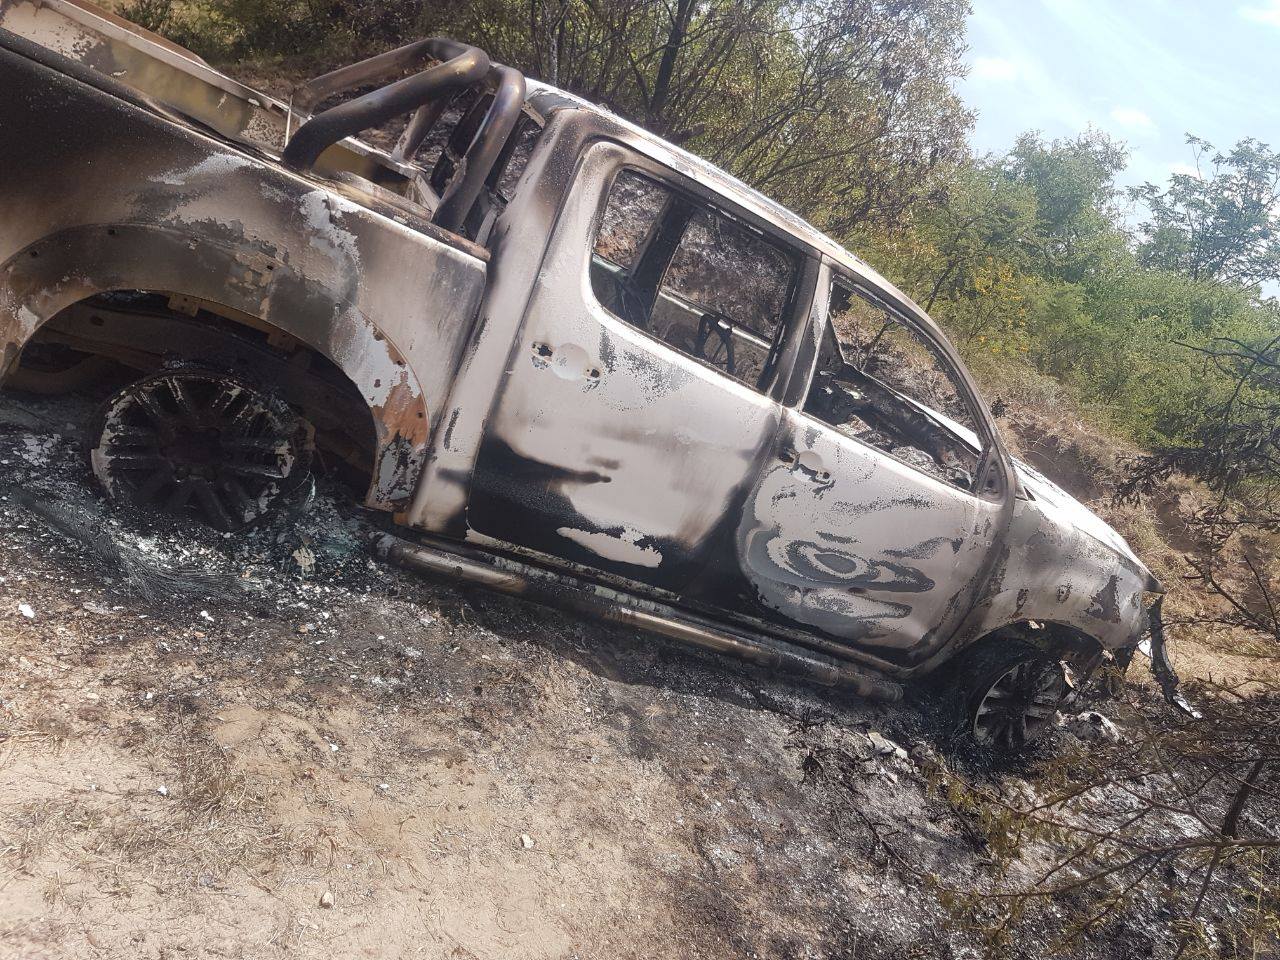 Manhunt launched for suspects after reportedly missing person is found in burnt-out vehicle